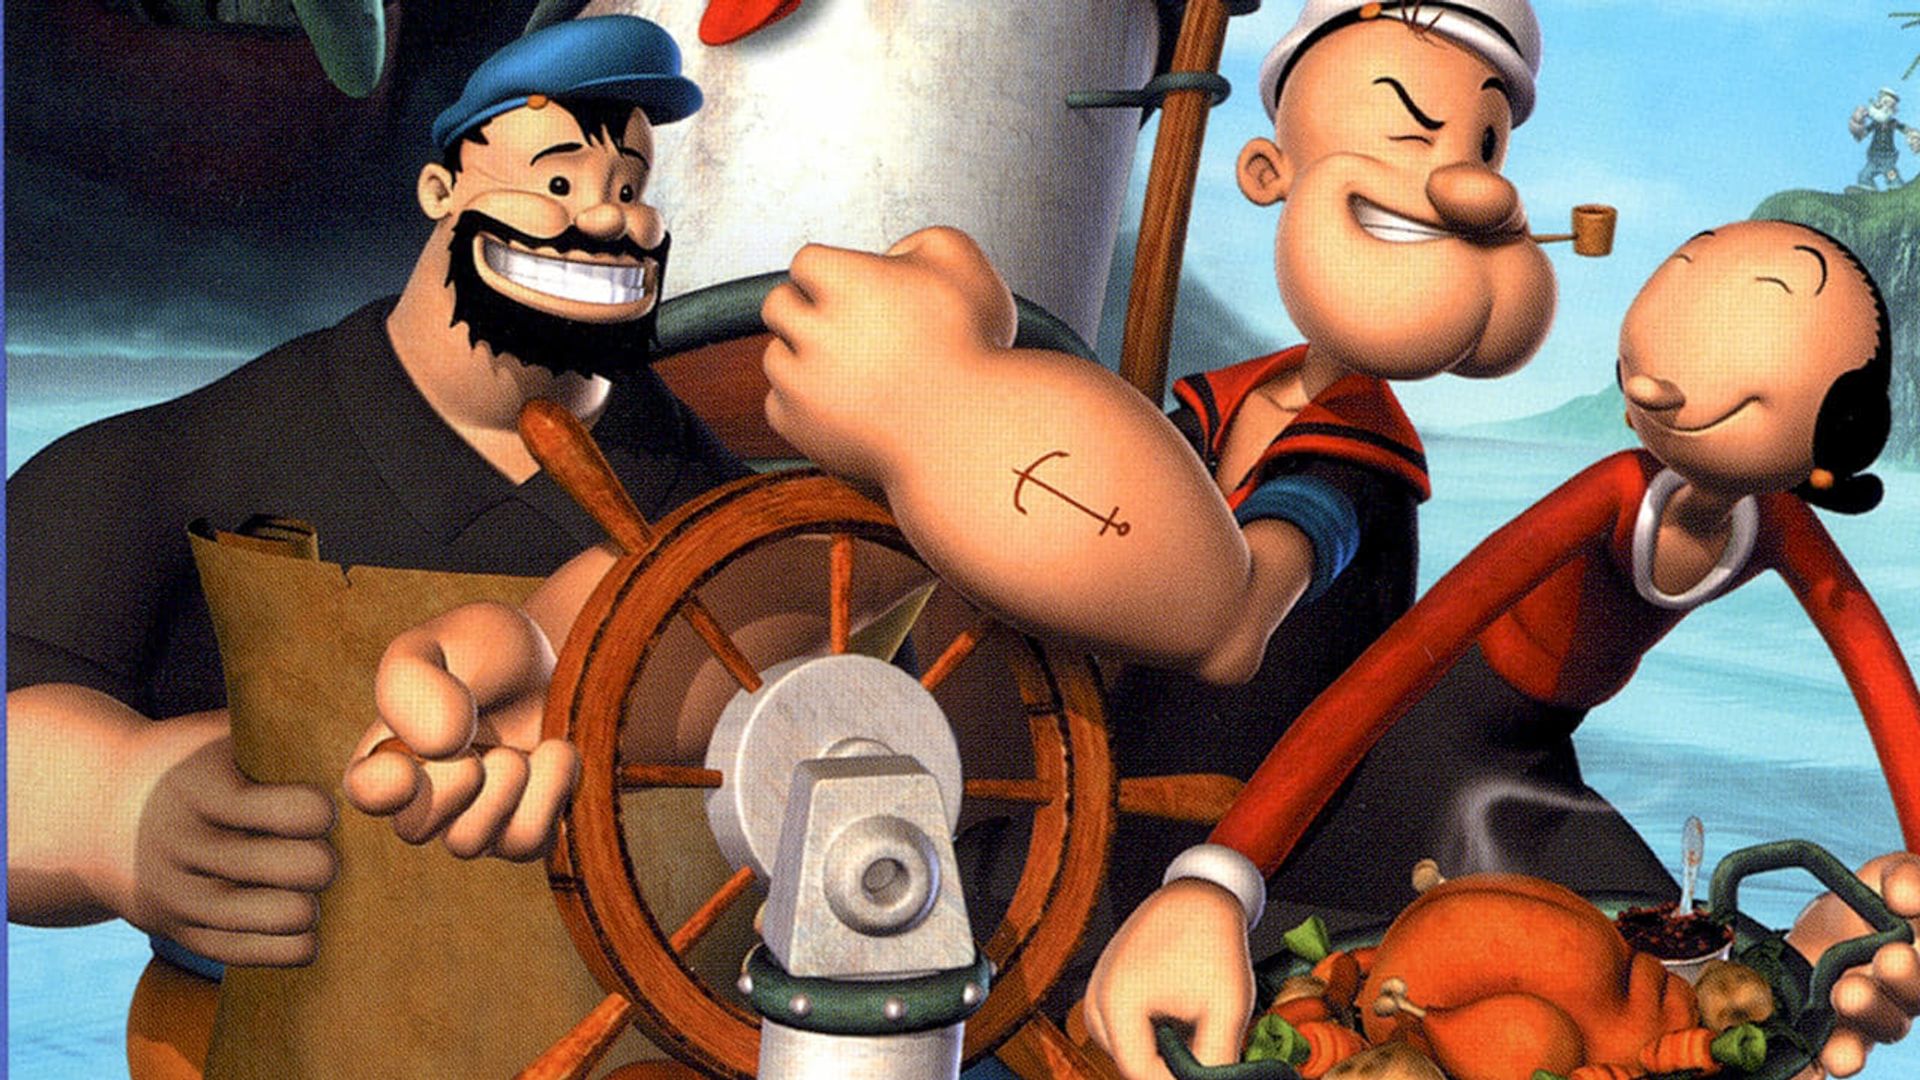 Popeye's Voyage: The Quest for Pappy background